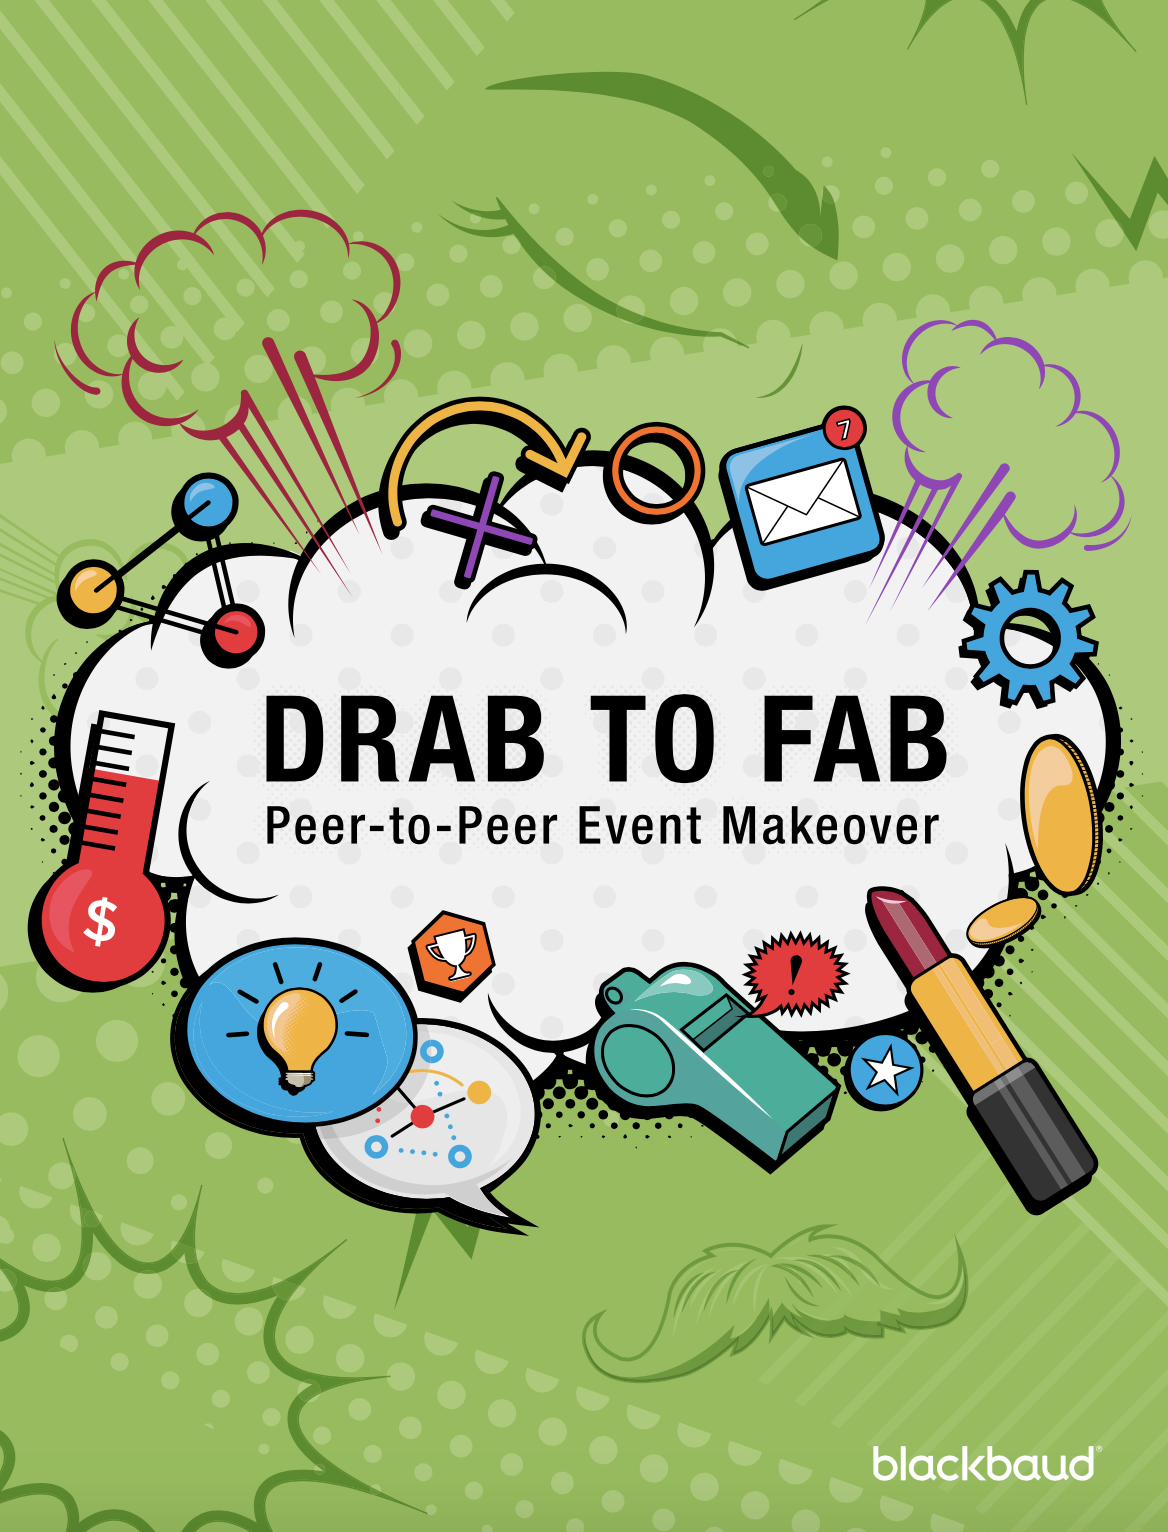 What Is Peer-To-Peer Fundraising An Excerpt From Drab To Fab – Peer-to-Peer Event Makeover E-book 4775